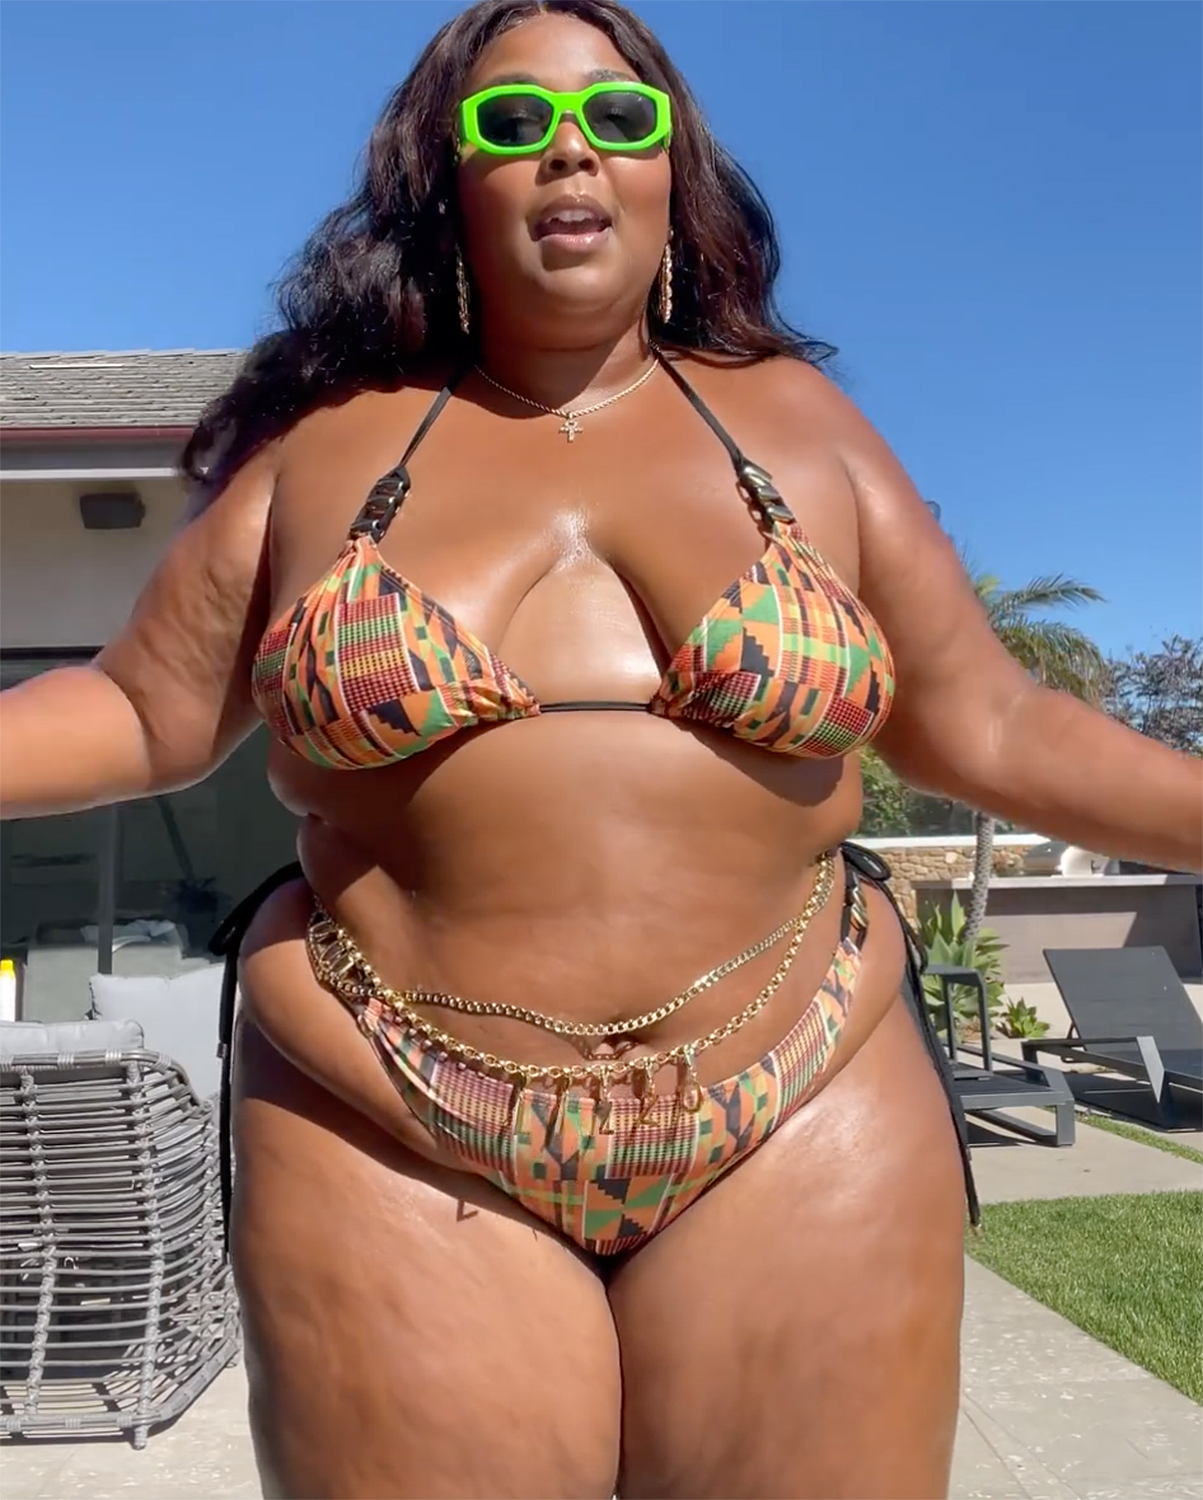 Lizzo Declares 'Big Girl Summer Has Officially Begun' as She Shows Off Her Abs in a Bikini